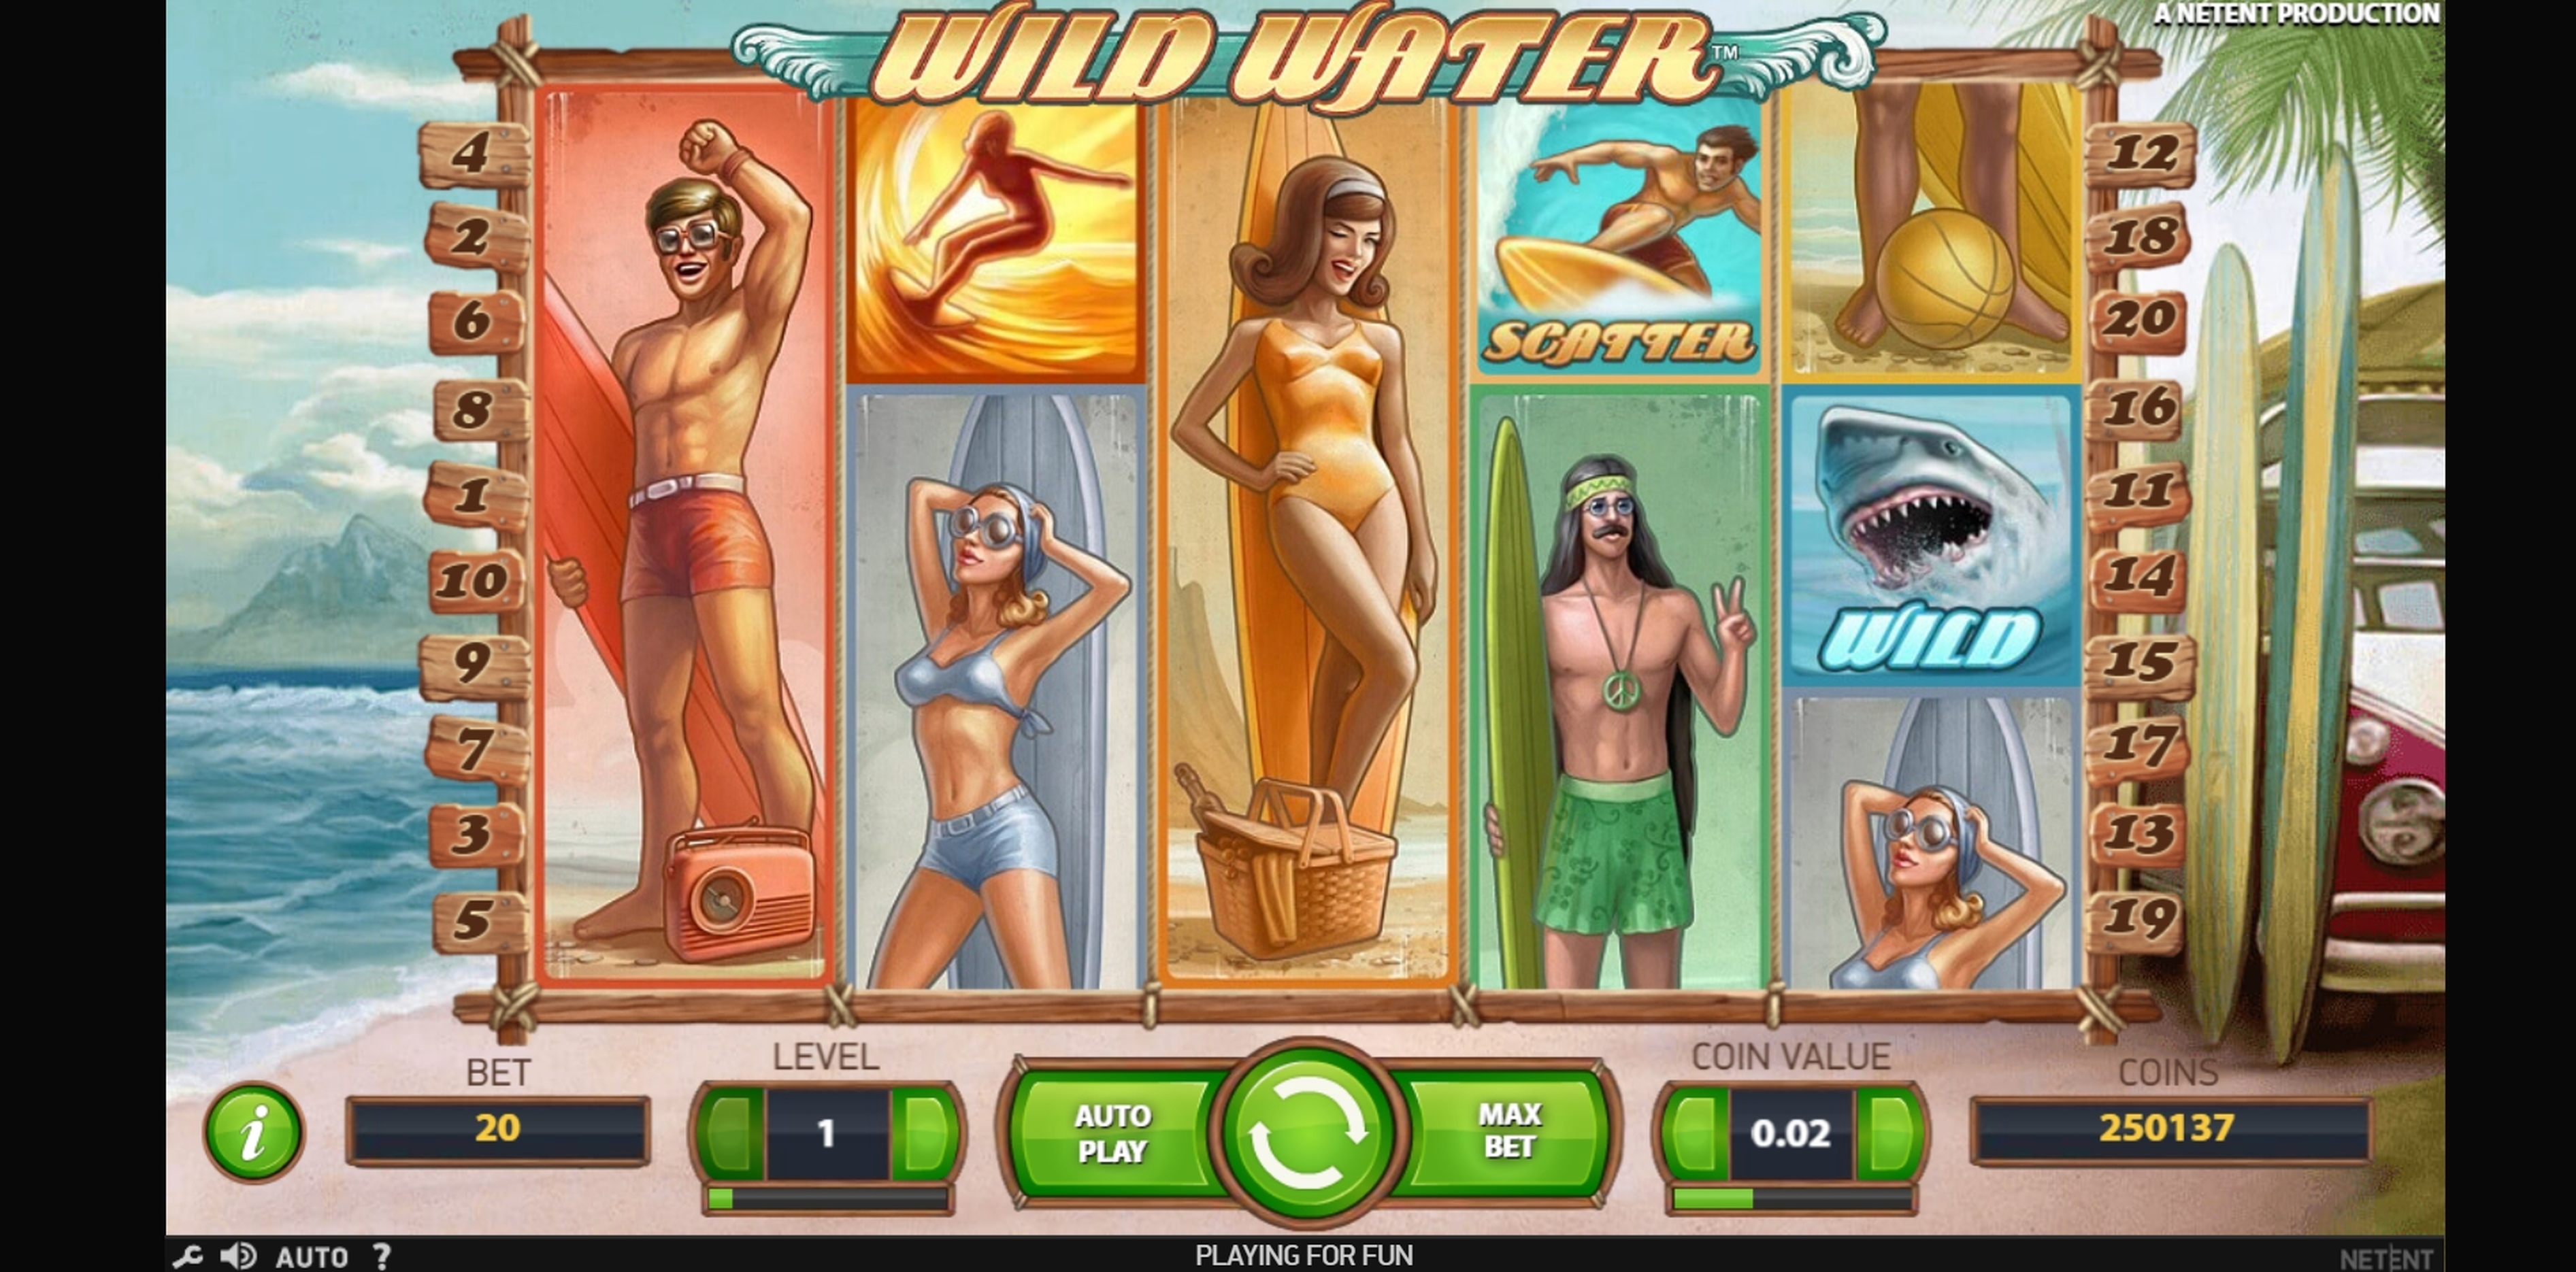 Reels in Wild Water Slot Game by NetEnt